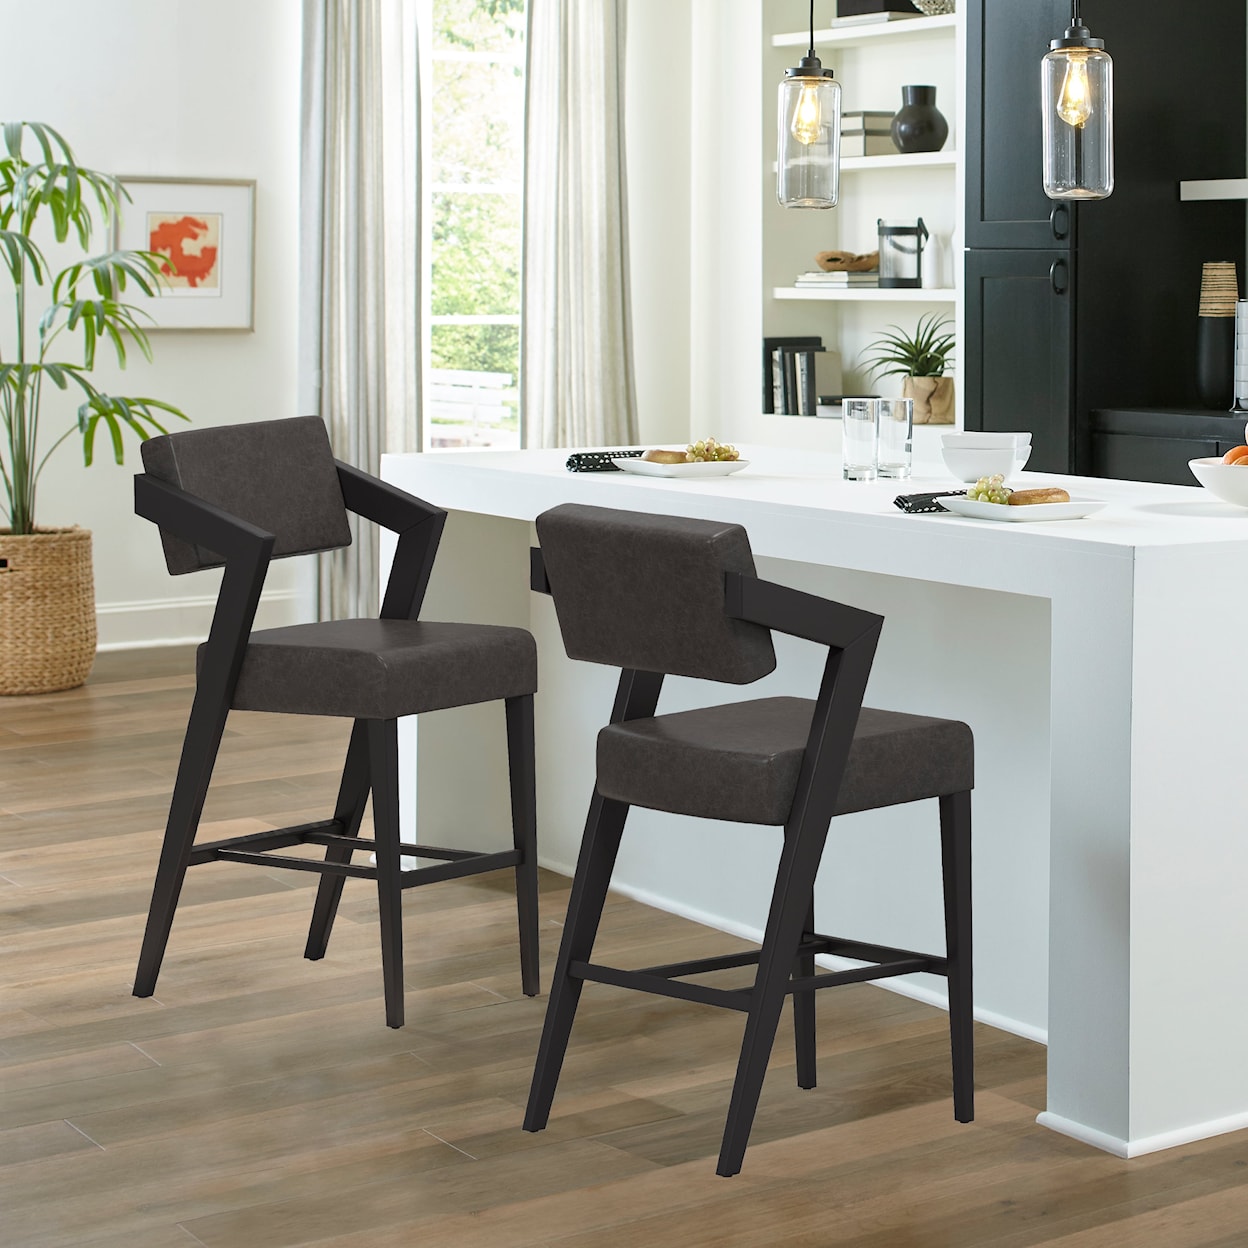 Hillsdale Snyder Counter Stool